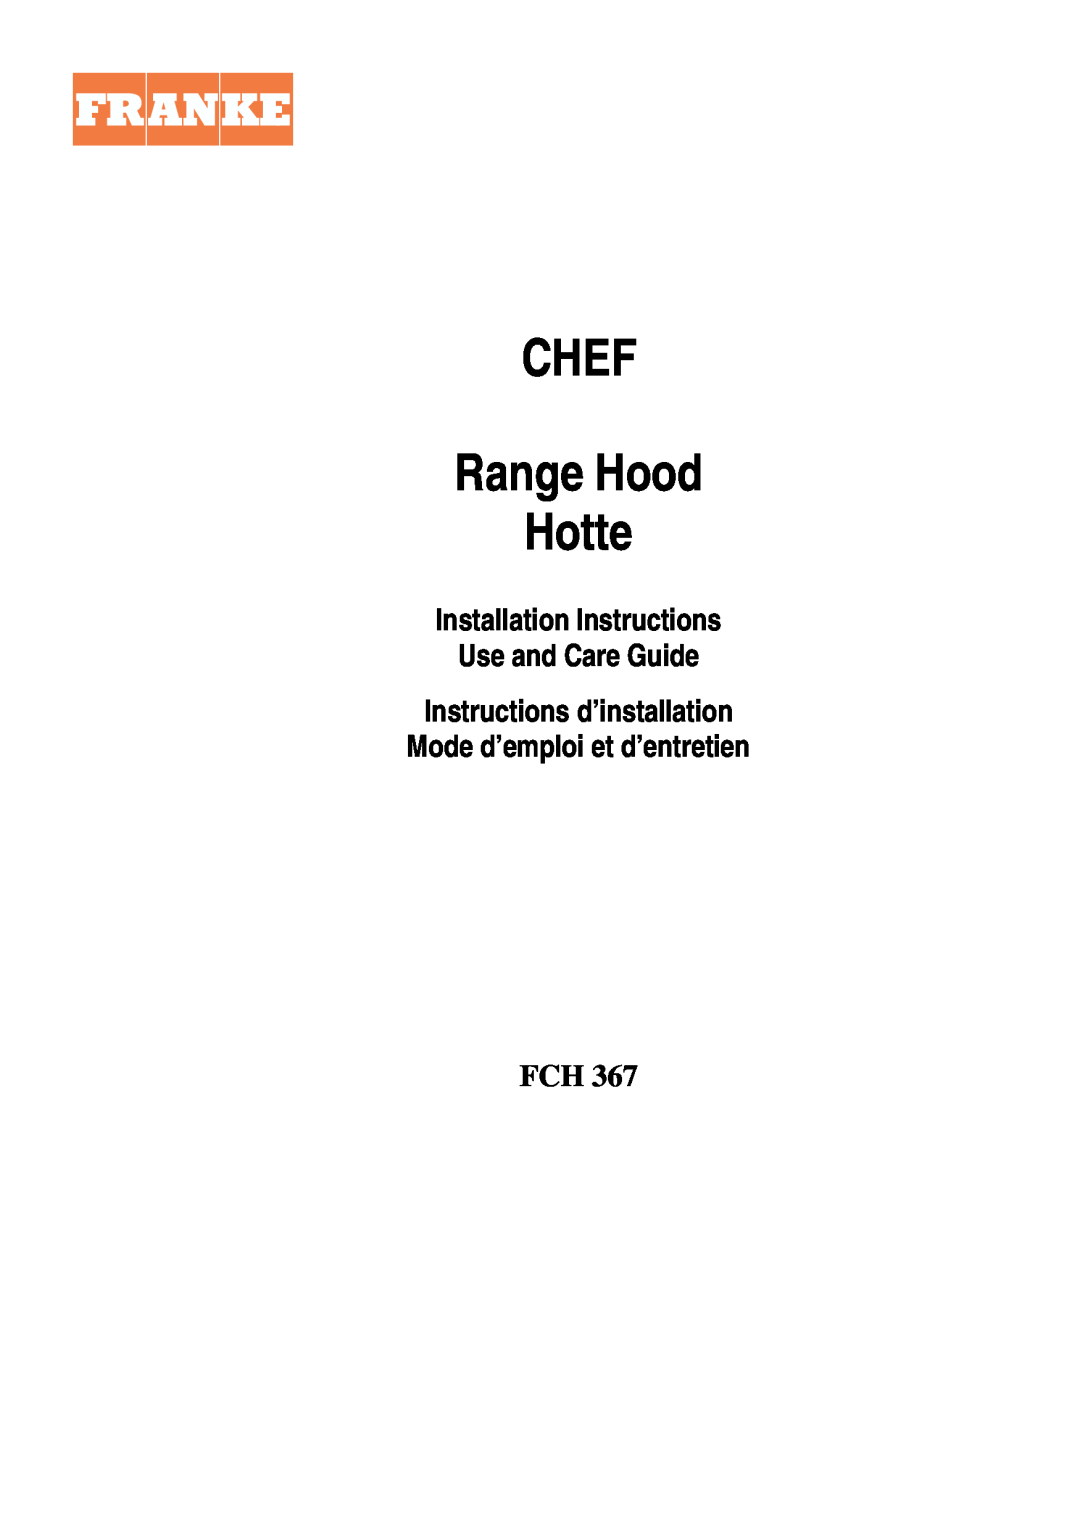 Franke Consumer Products FCH 367 installation instructions CHEF Range Hood Hotte 